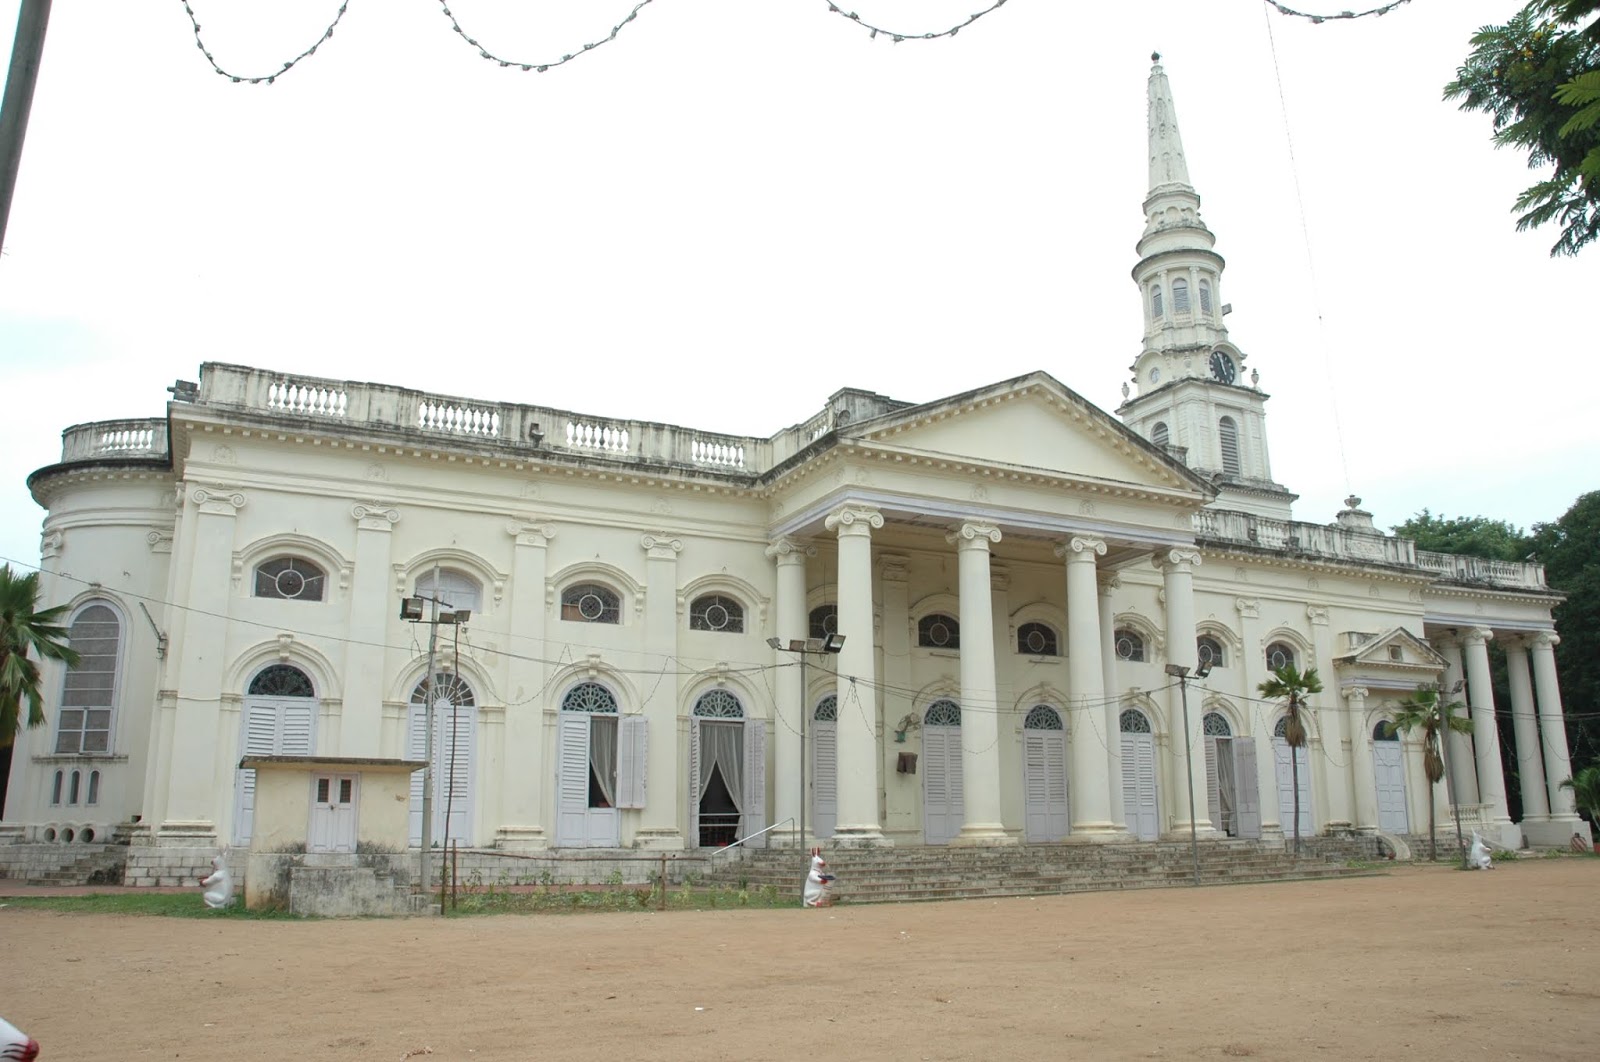 St. George’s cathedral, Chennai steeped in colonial history